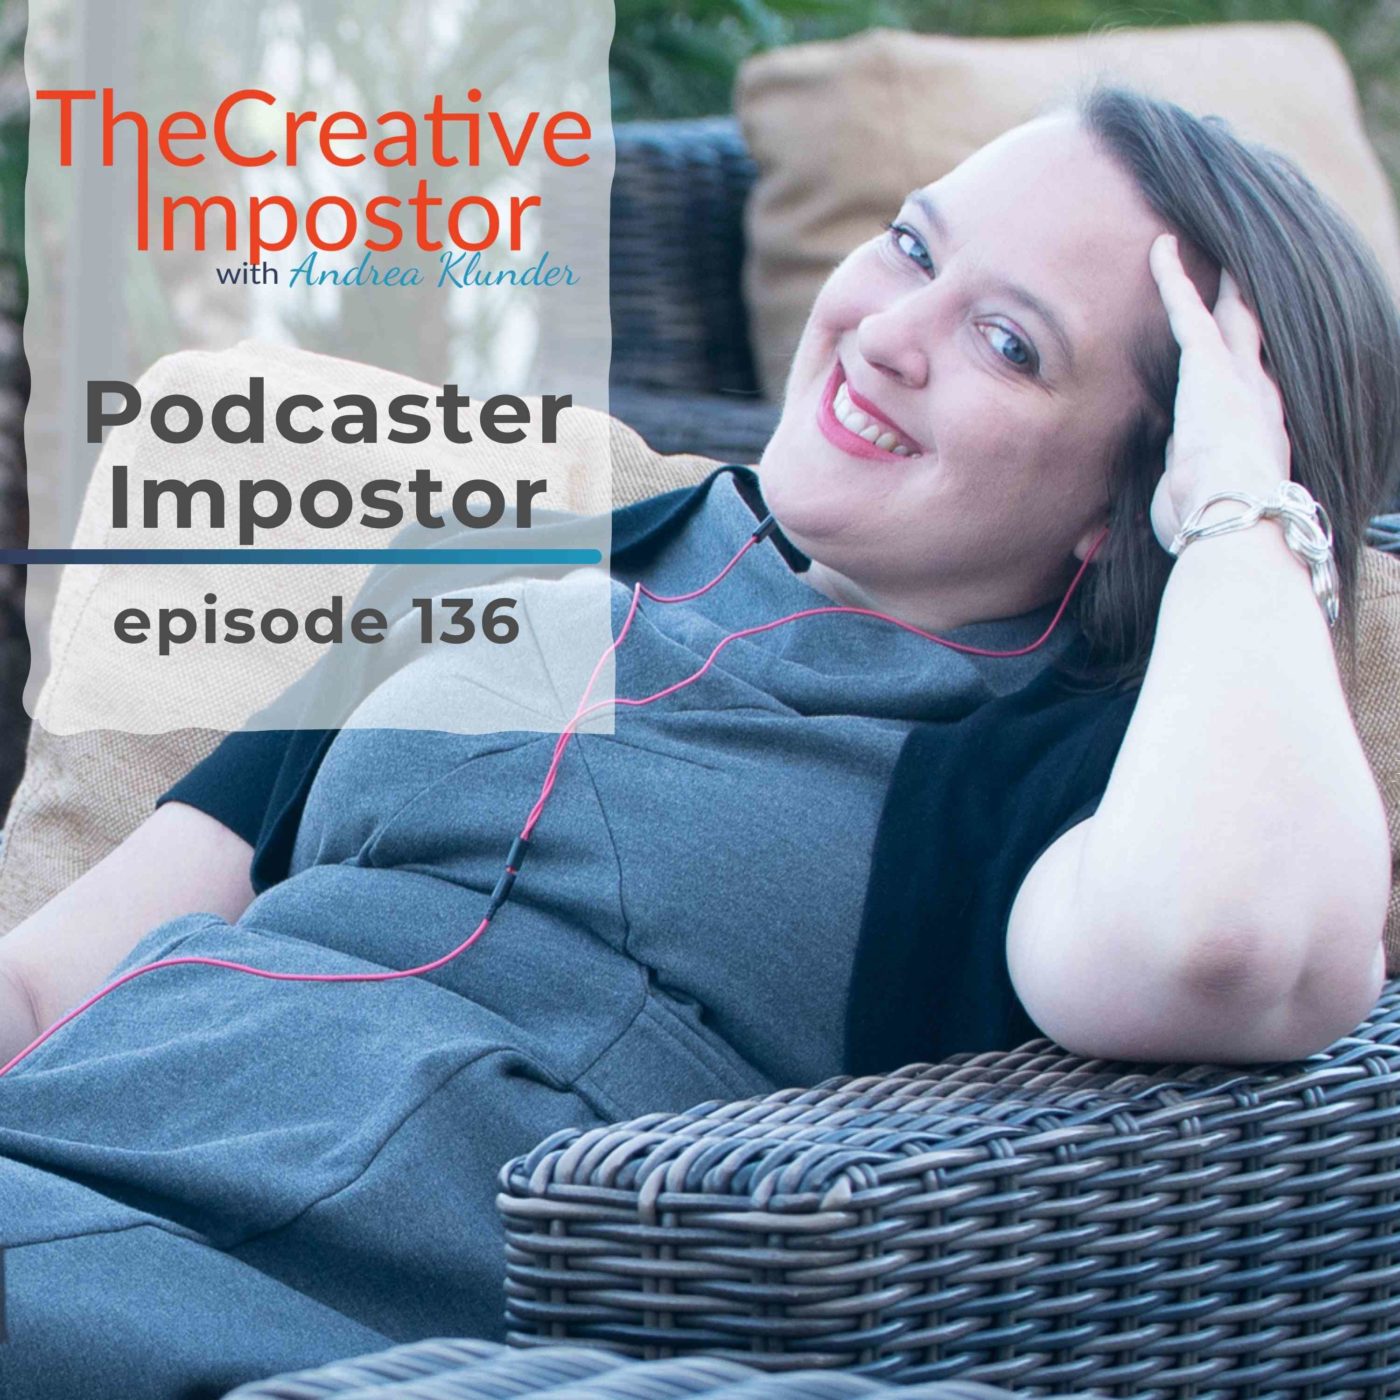 Podcaster Impostor with Andrea Klunder